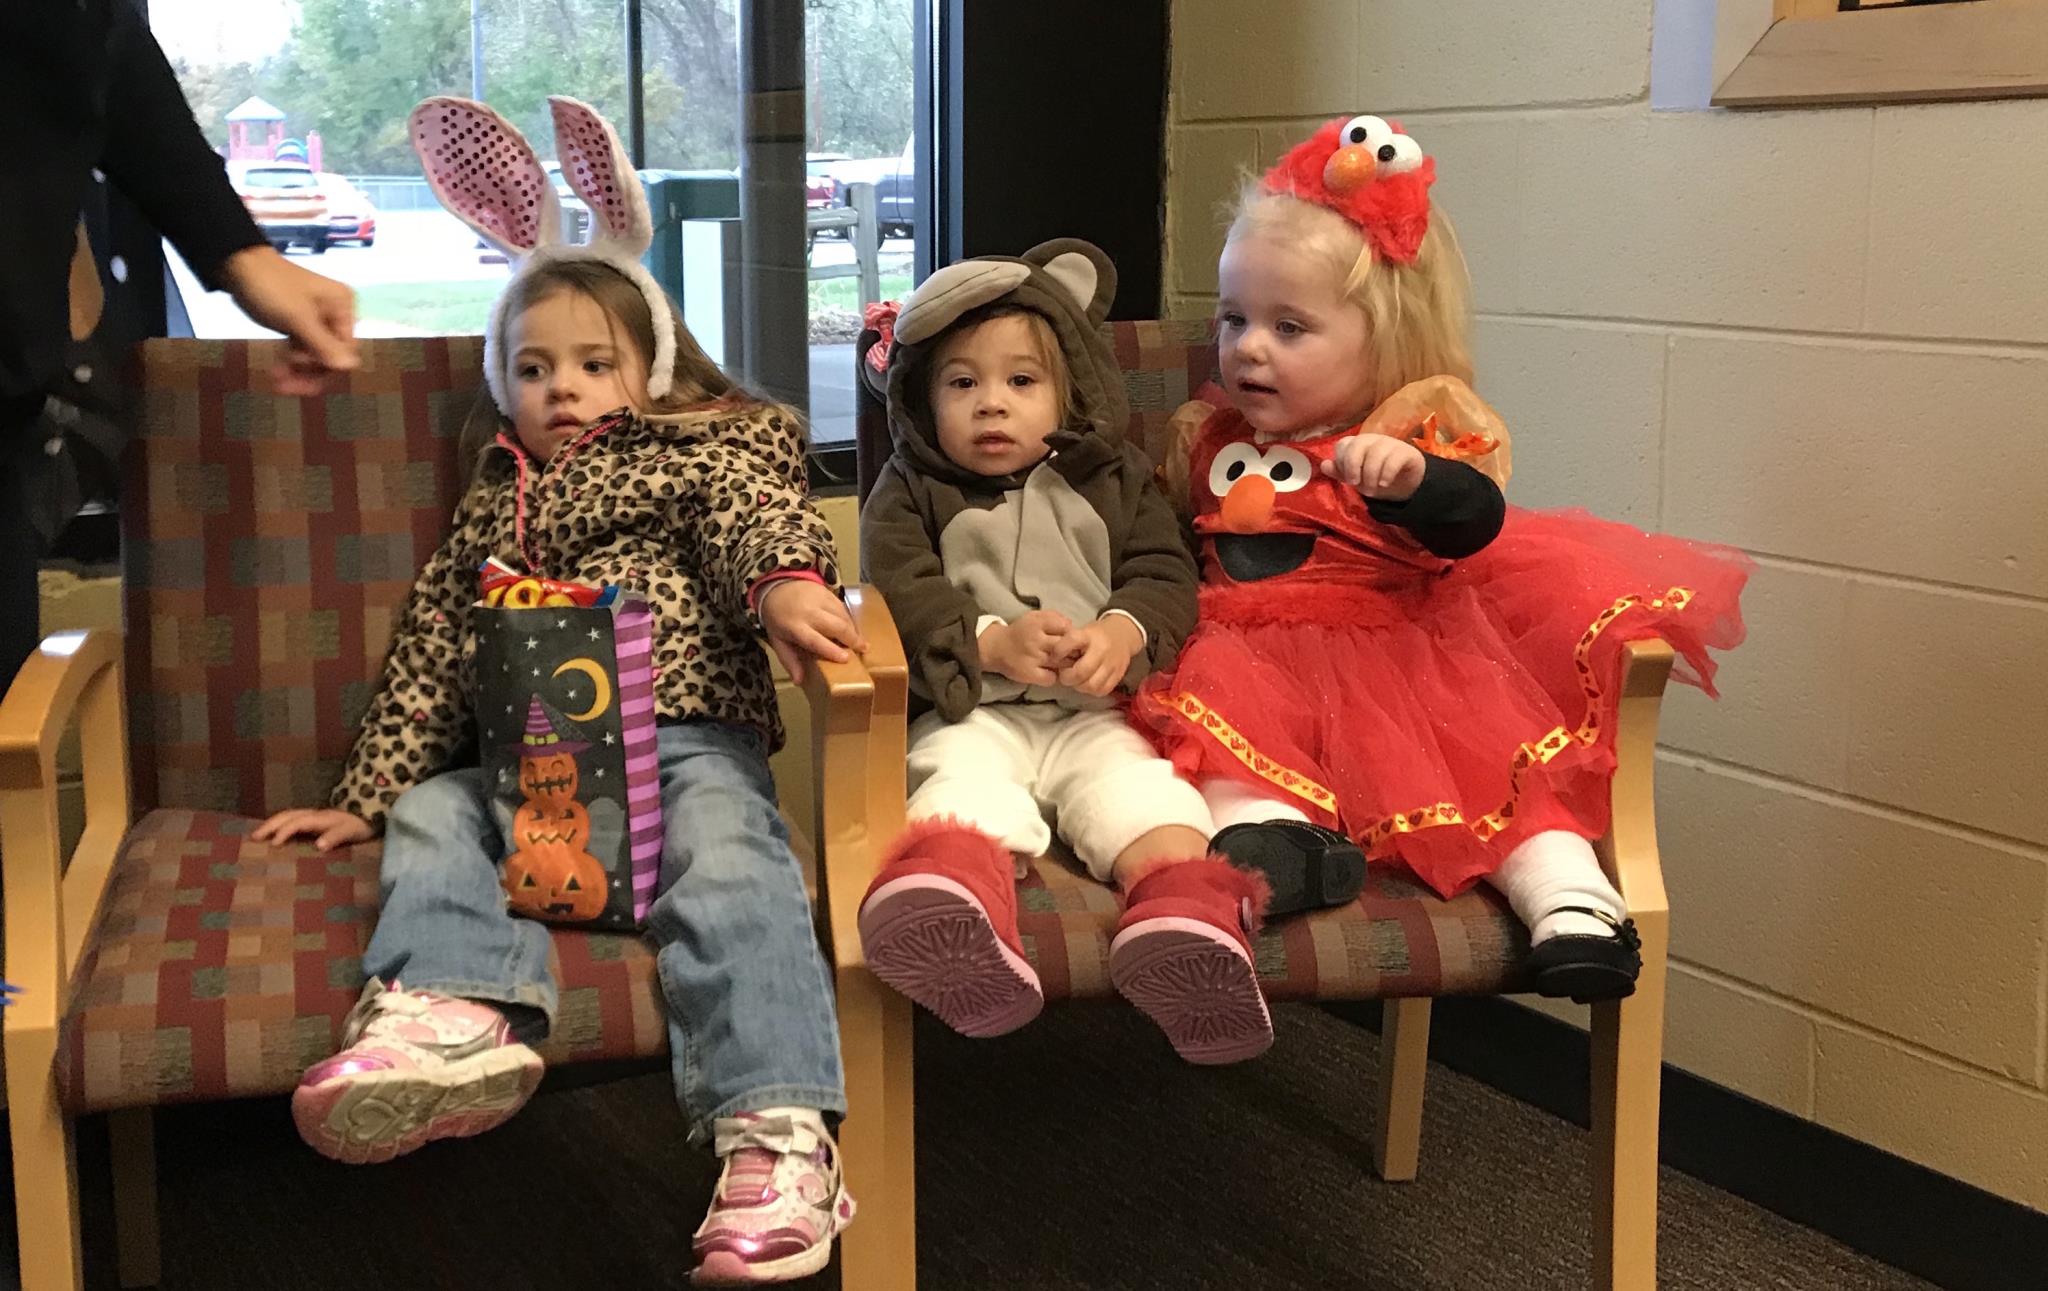 Three early on students, a bunny, a monkey, and elmo